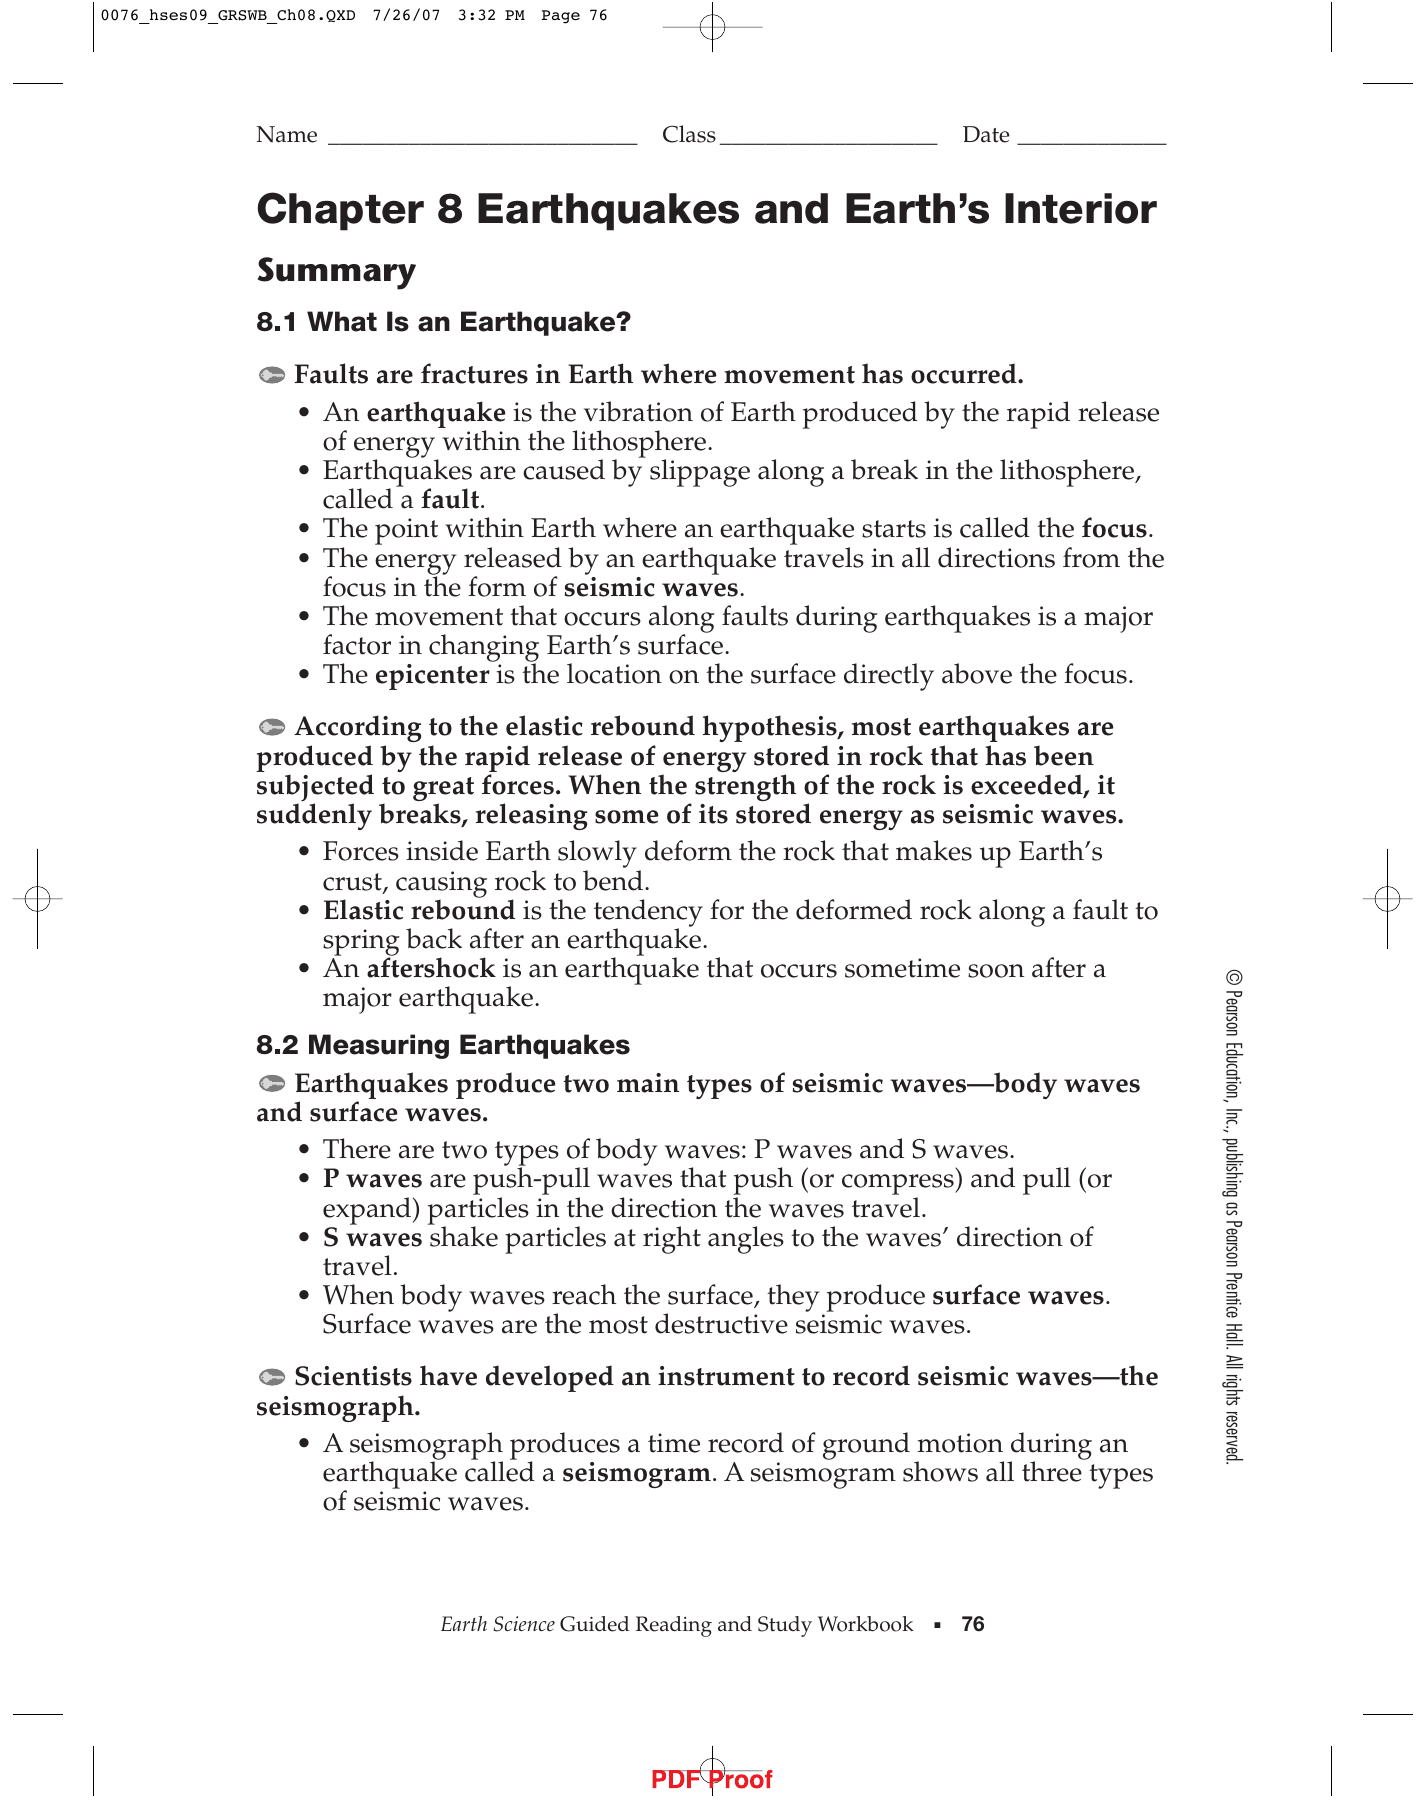 Chapter 8 Earthquakes And Earth S Interior